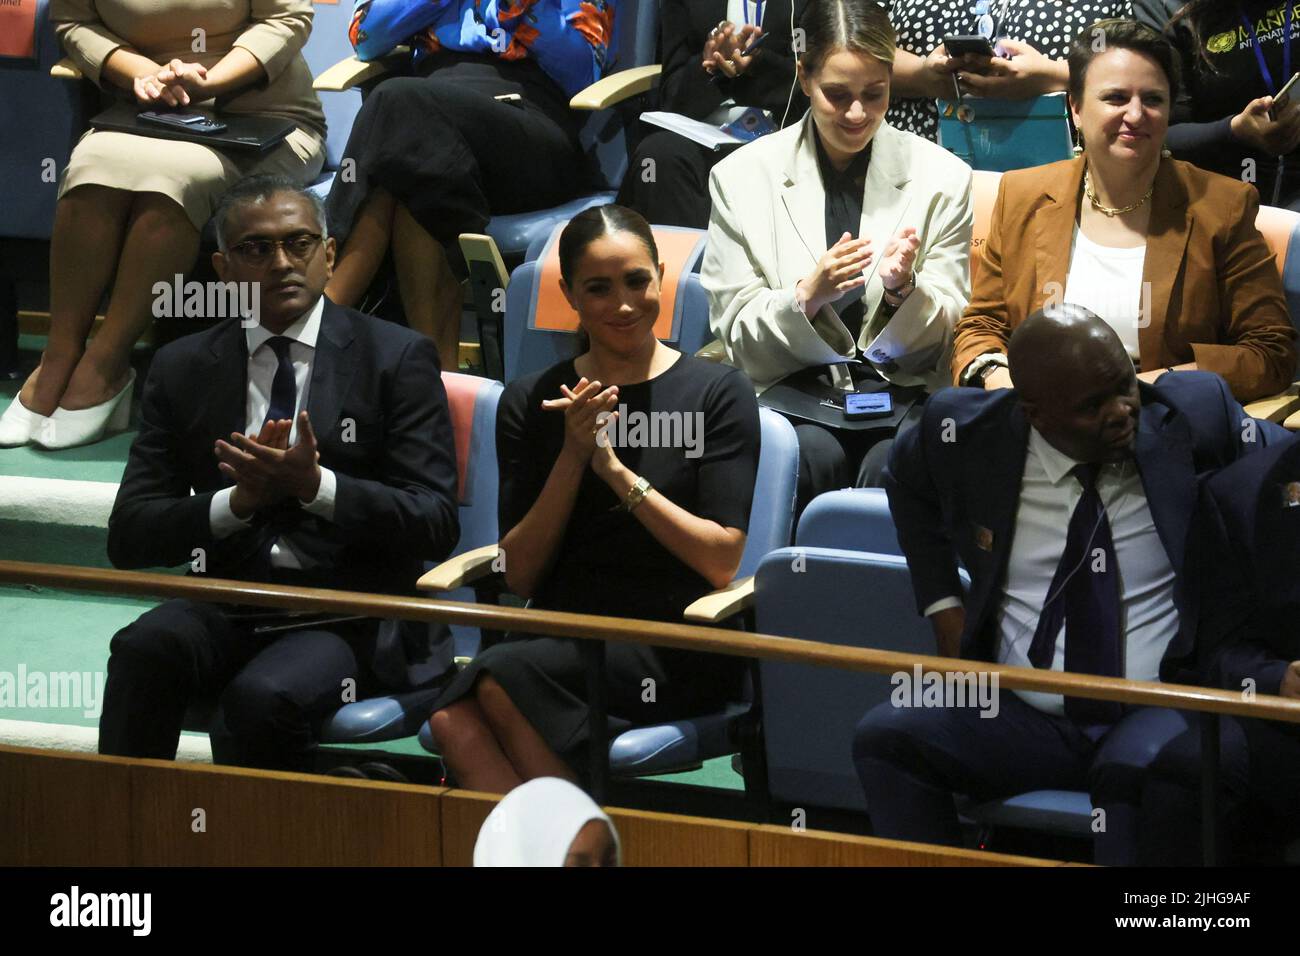 Britain's Meghan, Duchess of Sussex applauds during a celebration of Nelson Mandela International Day at the United Nations Headquarters in New York, U.S., July 18, 2022. REUTERS/Shannon Stapleton Stock Photo